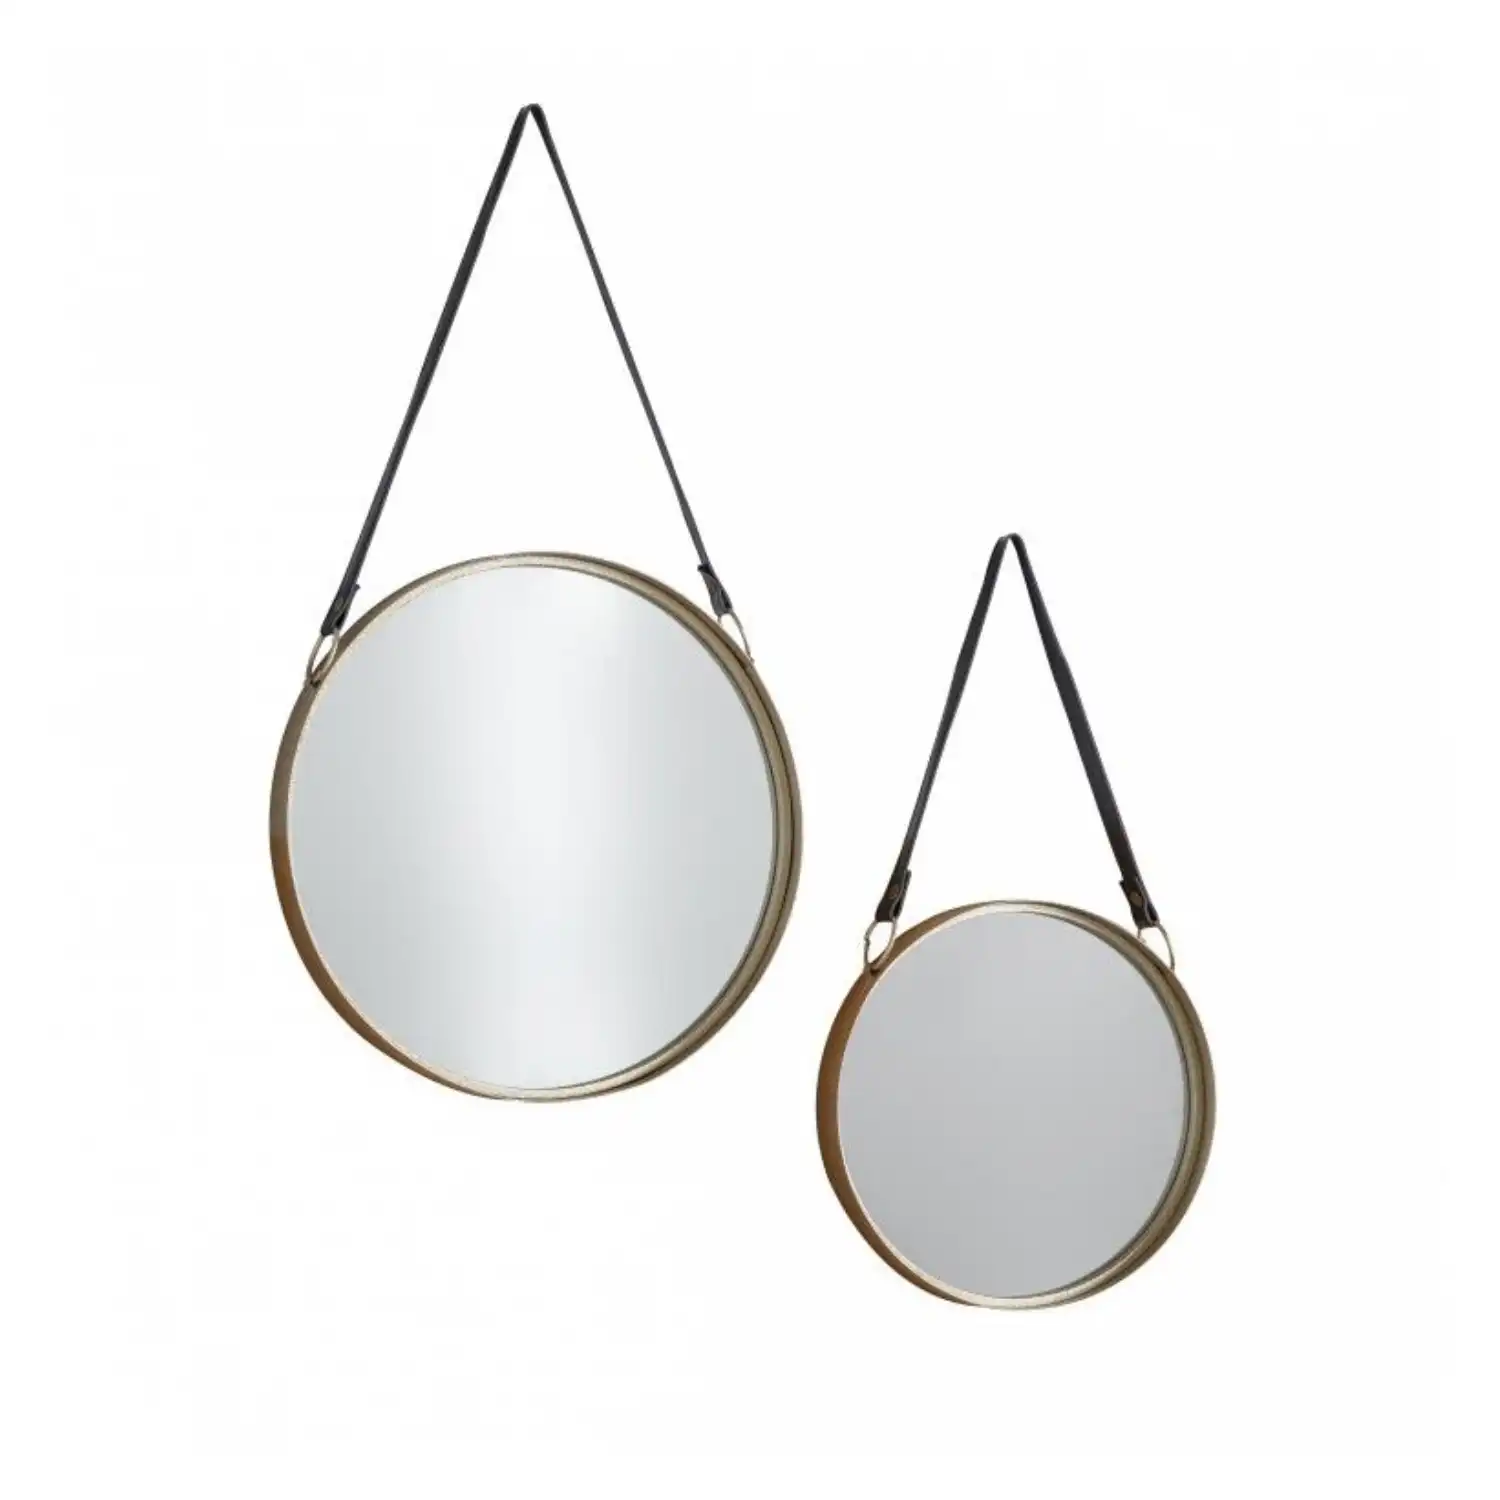 Mirrors With Leather Hanging Strap Gold (Set of 2)